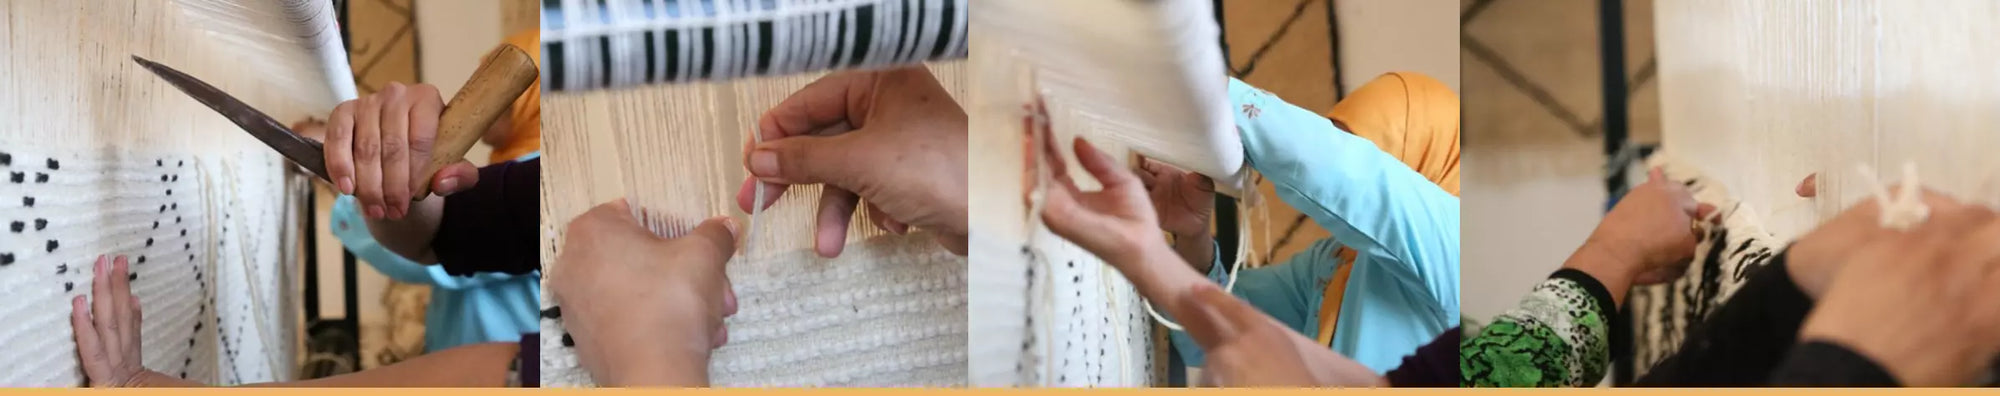 Hand weaving process of Moroccan rugs